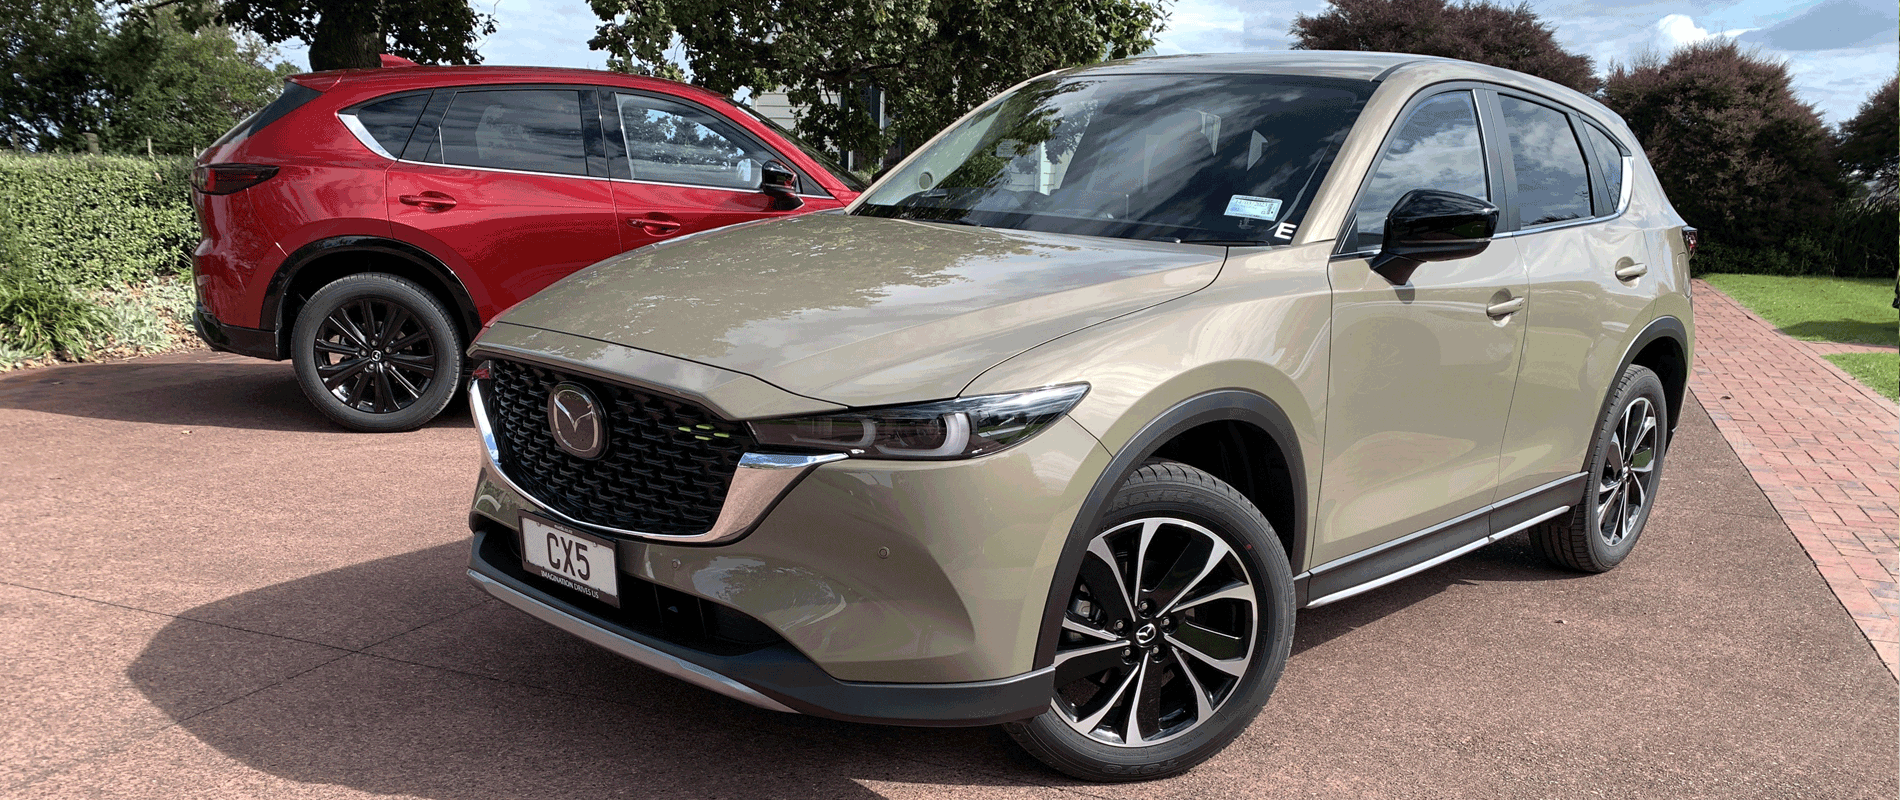 CX5 Updated, Refreshed - Richard Bosselman reviews